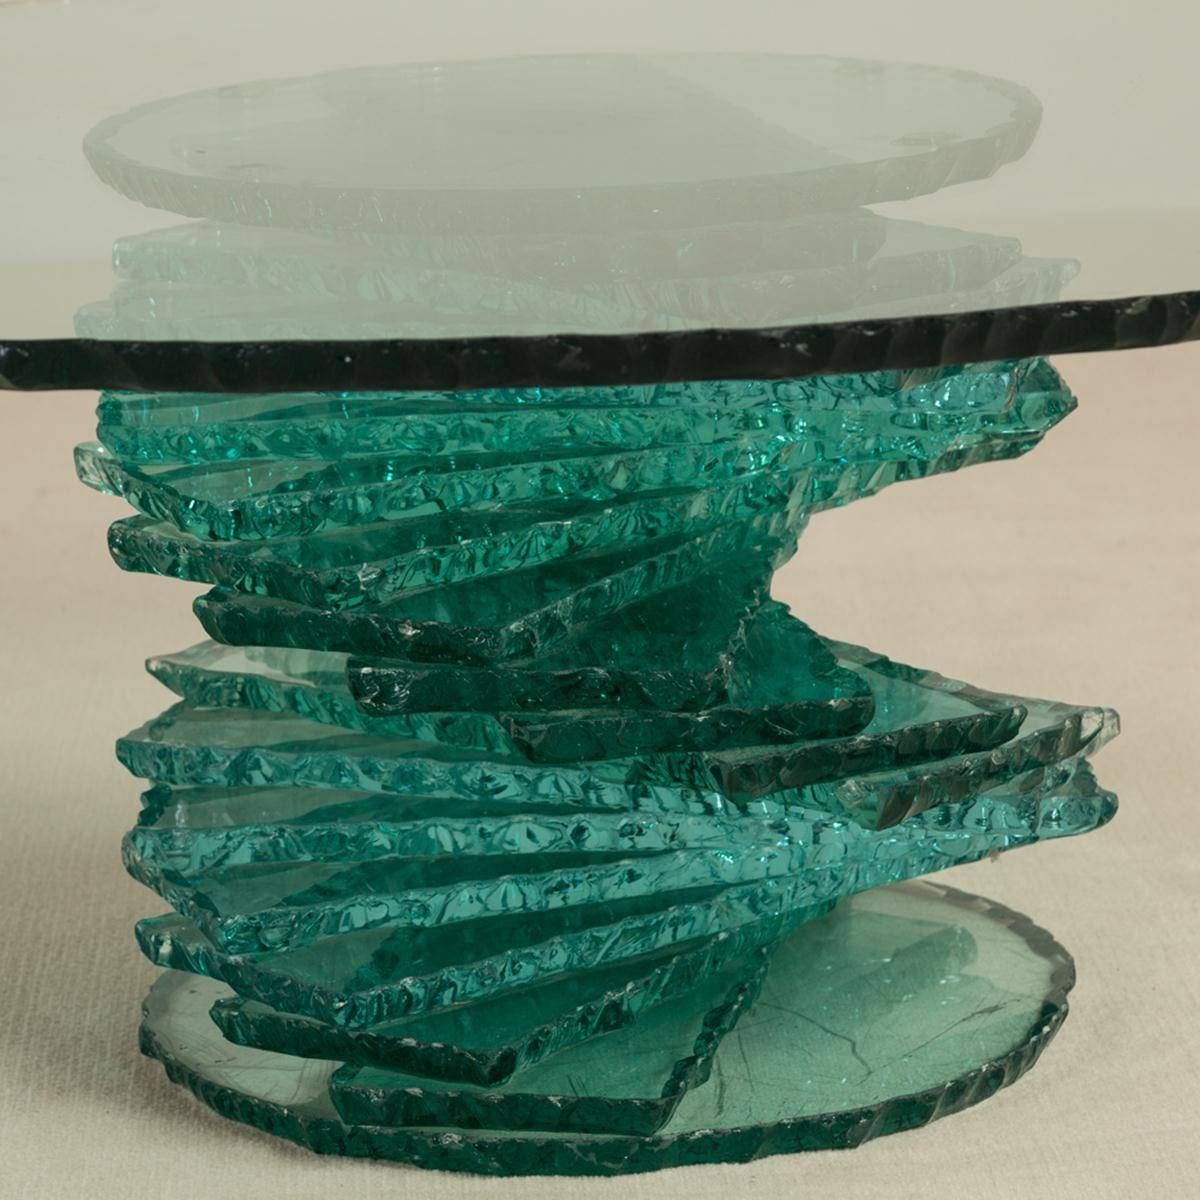 A Late 20th Century Spiral Pedestal Based Glass Coffee Table Intended For Spiral Glass Coffee Table (View 15 of 15)